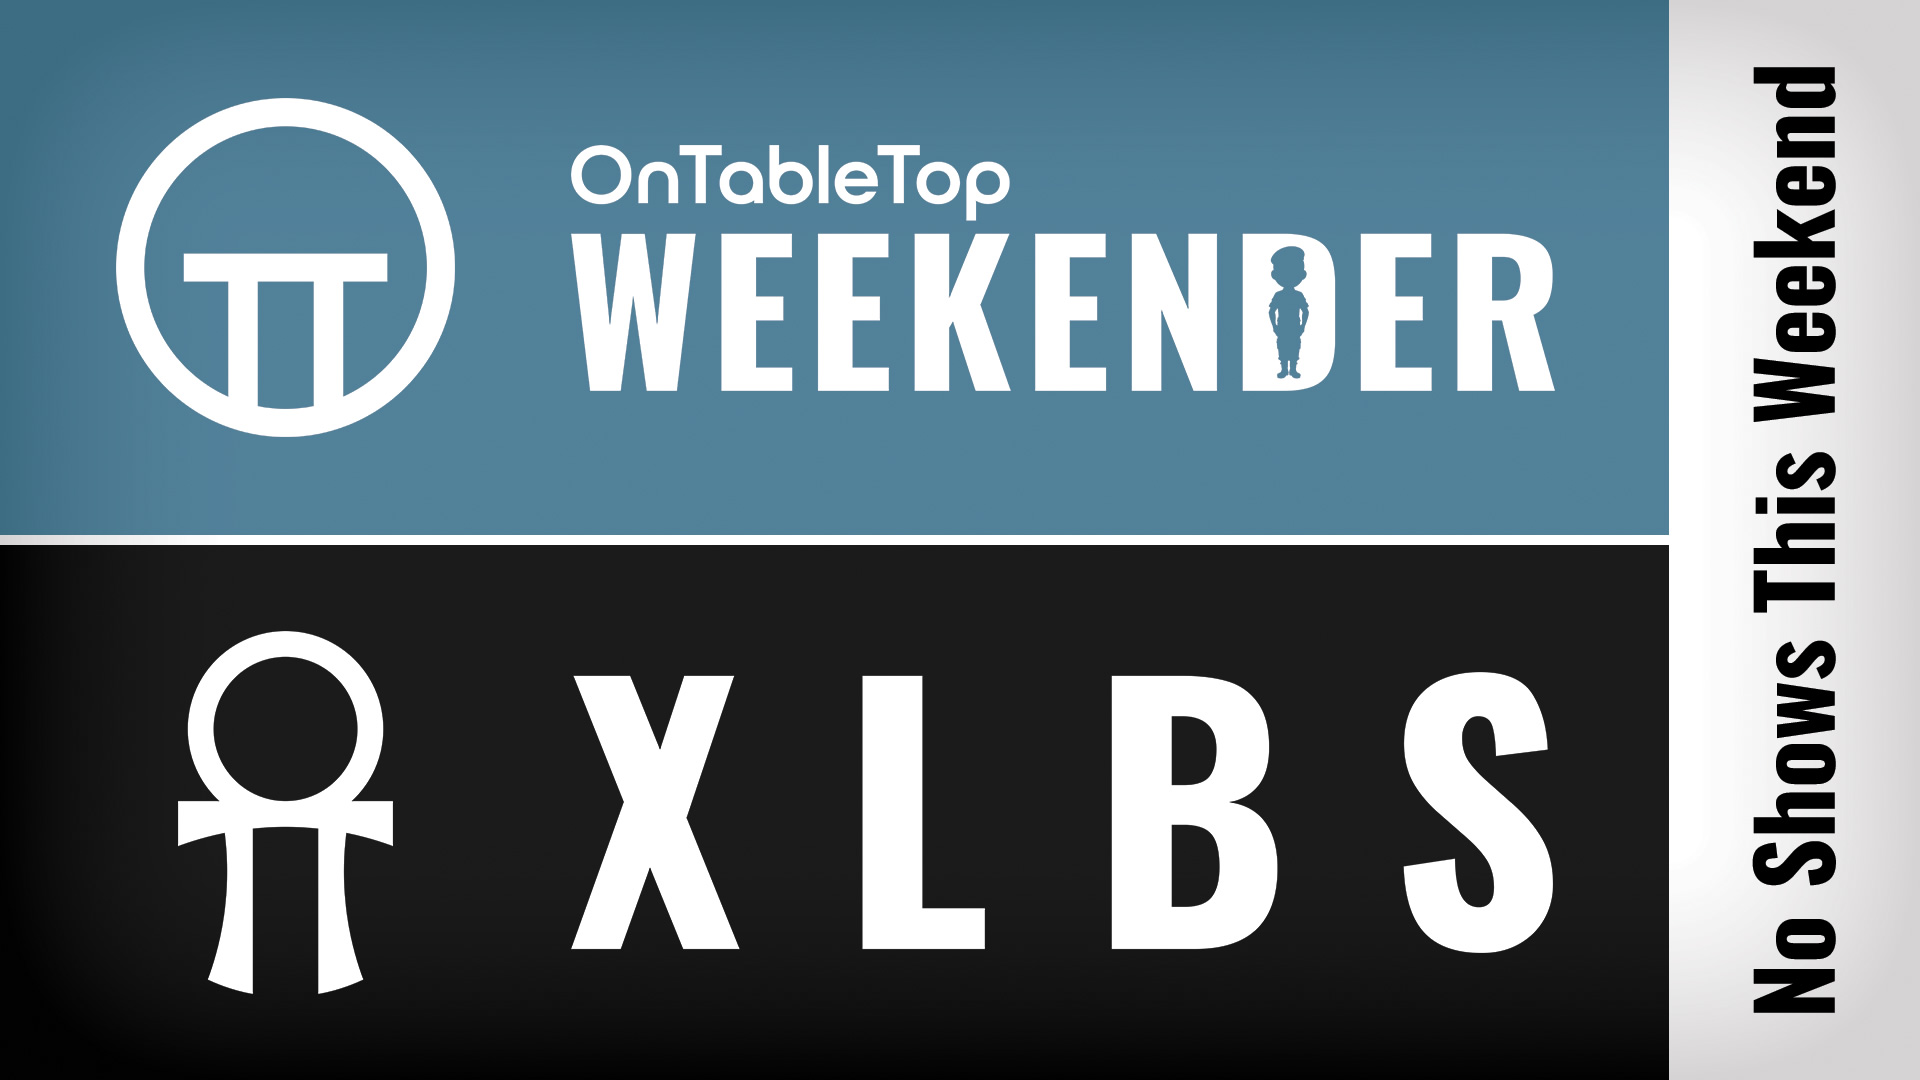 No_Weekender_and_XLBS_this_Weekend